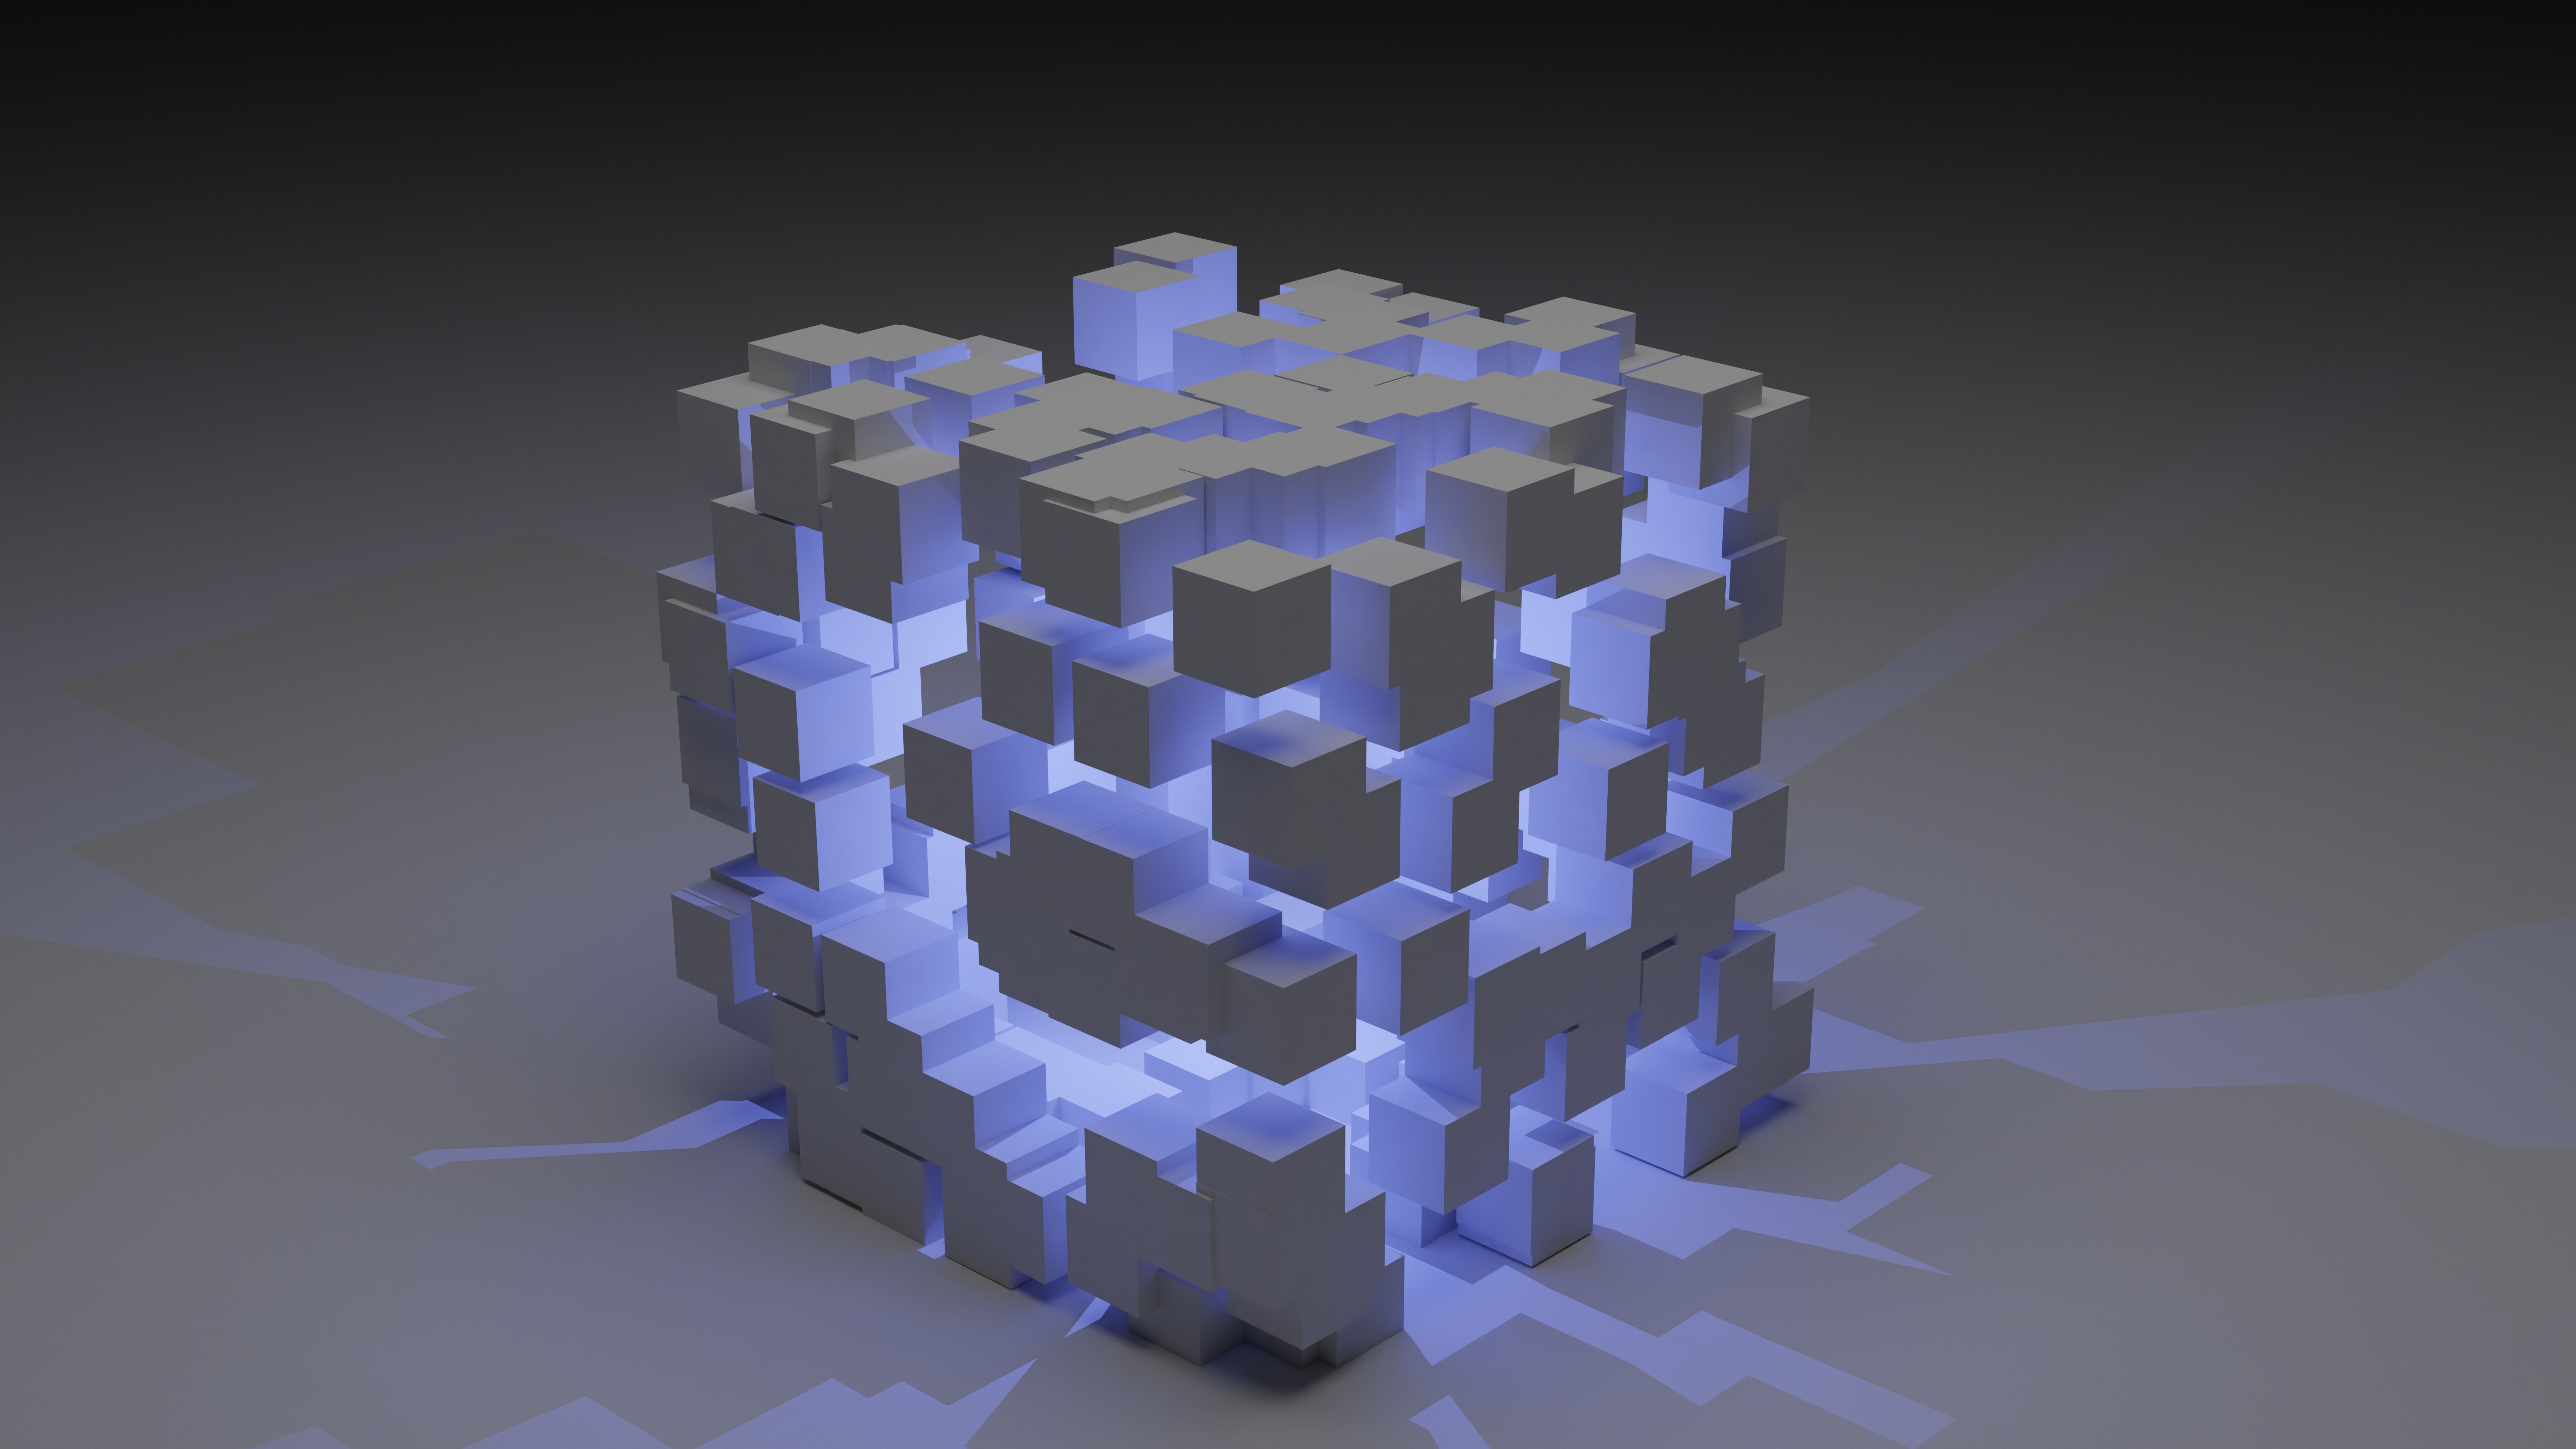 A graphic representation of blockchain: a blue and white cube made up of unique, separate parts